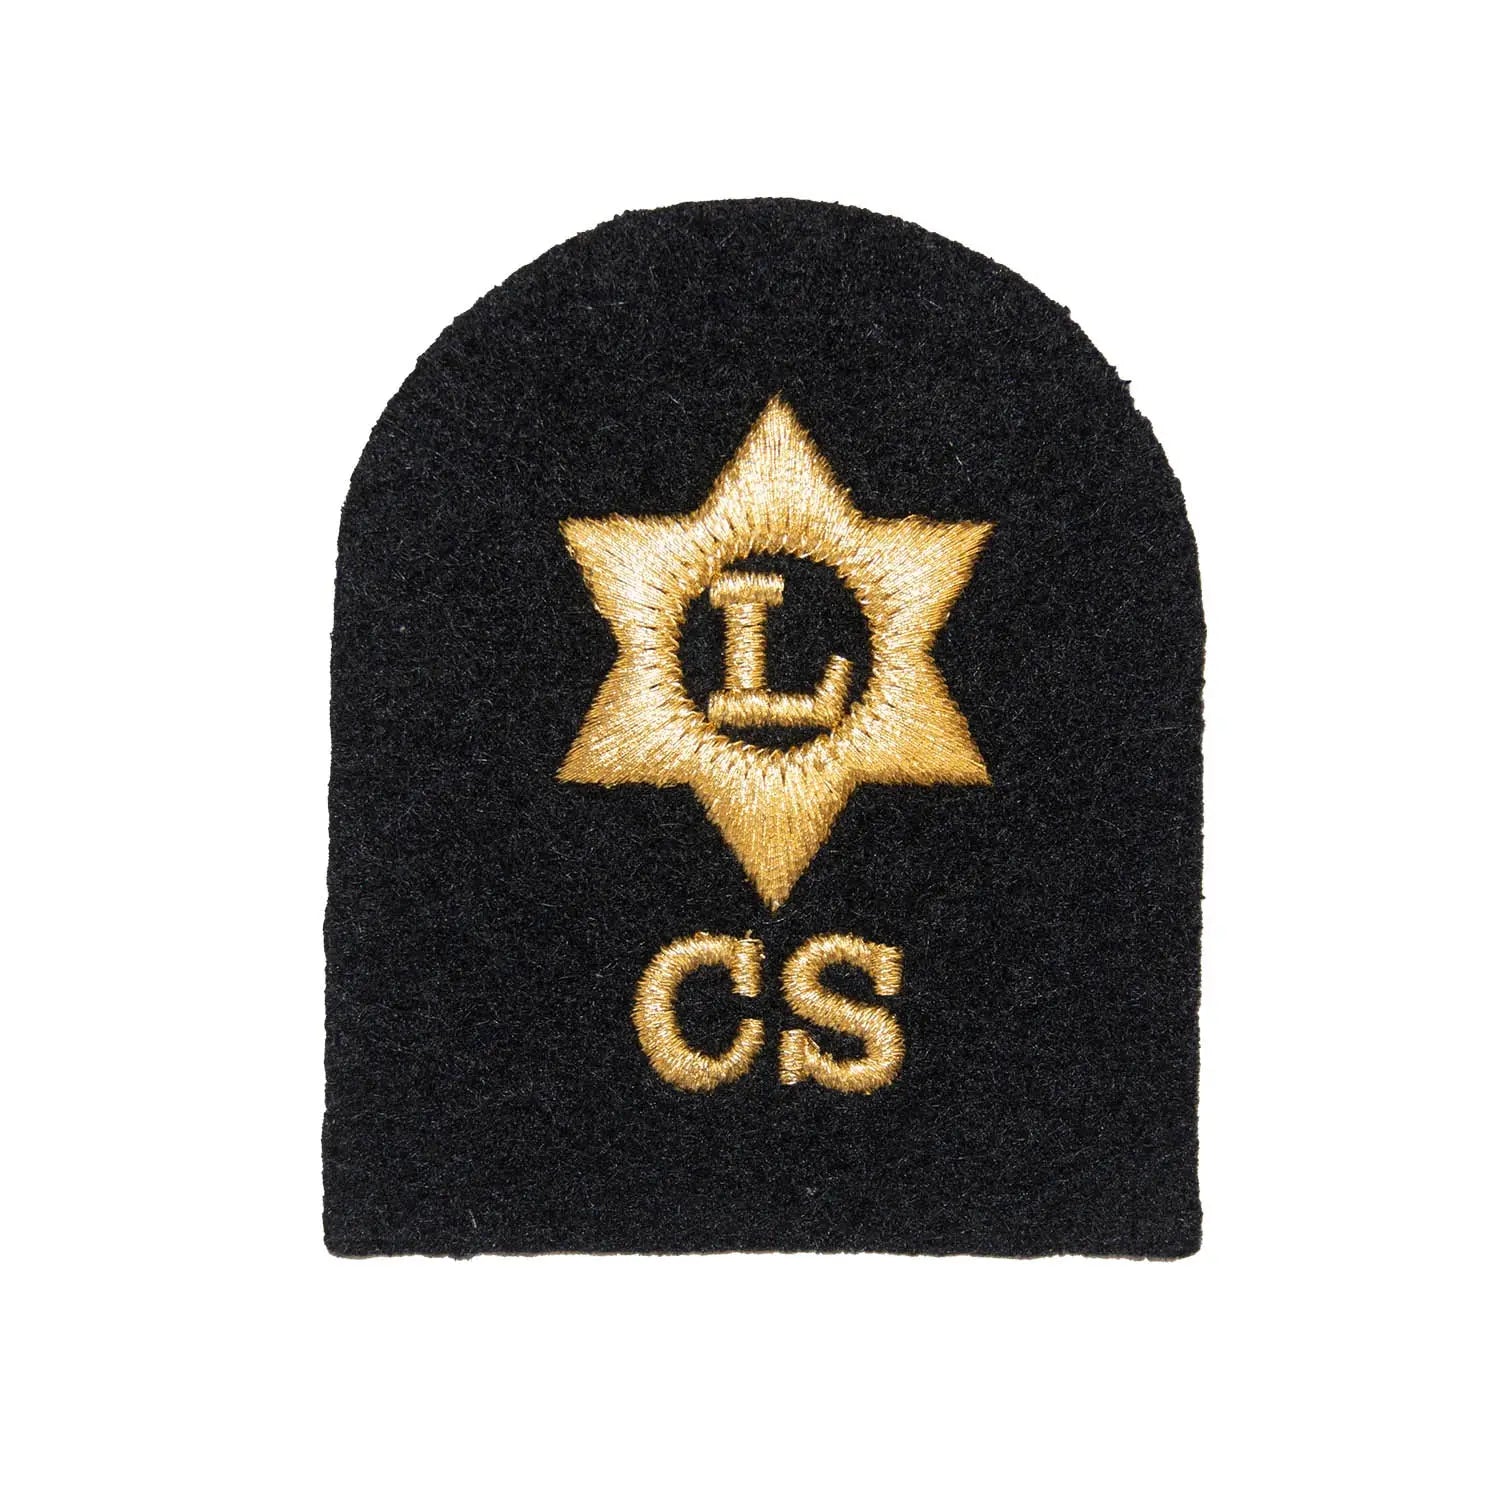 Logistics Catering Service (CS) Basic Rate Royal Navy Badges wyedean